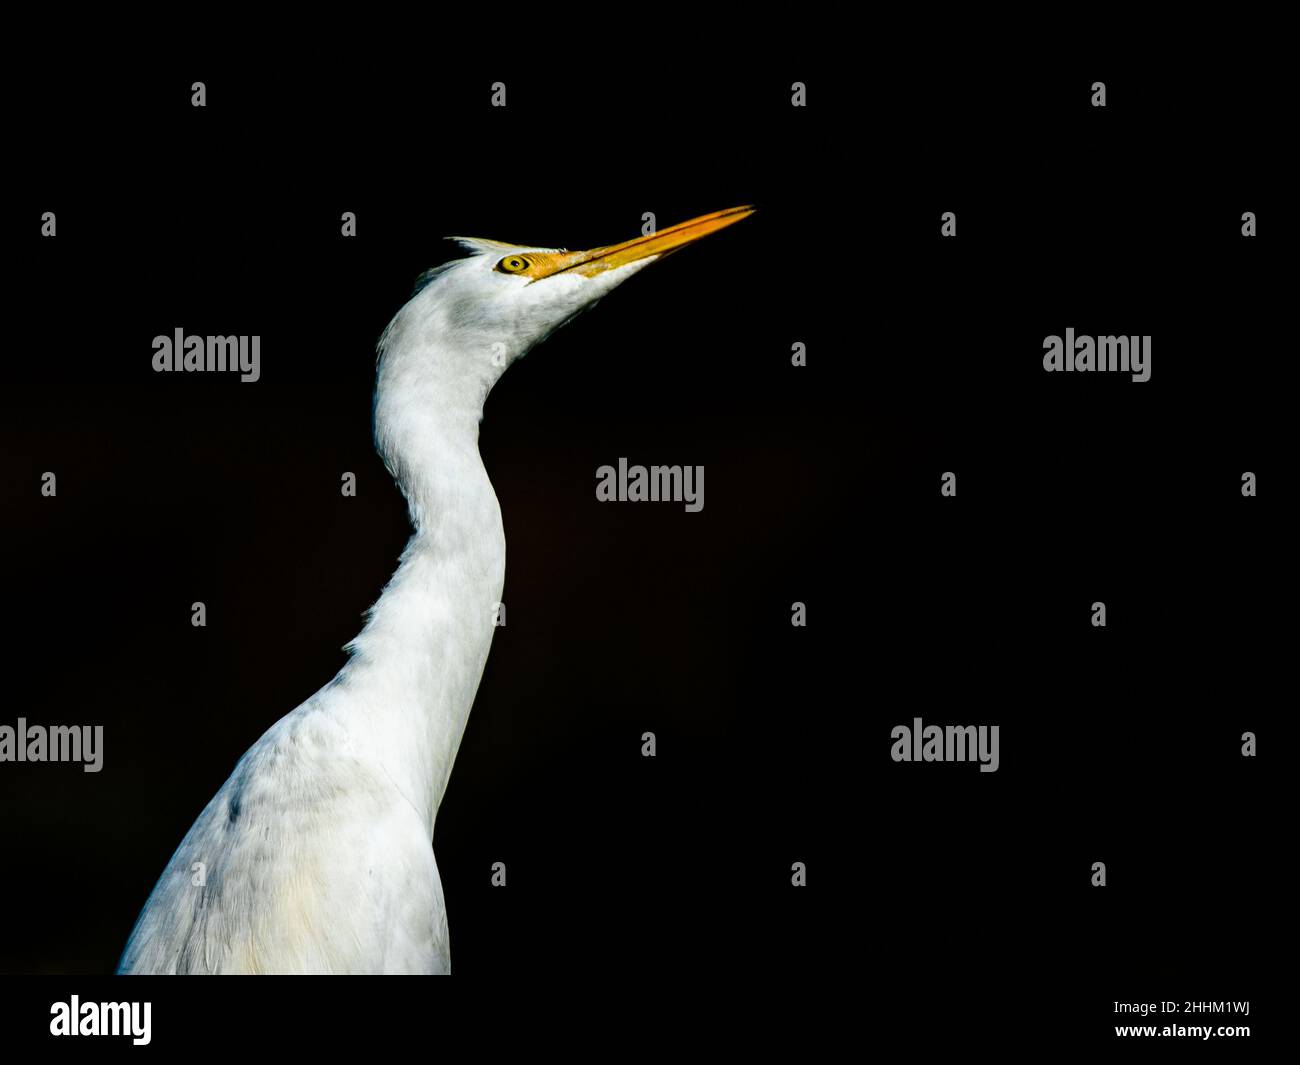 Low key image of Little Egret looking upward while searching food Stock Photo